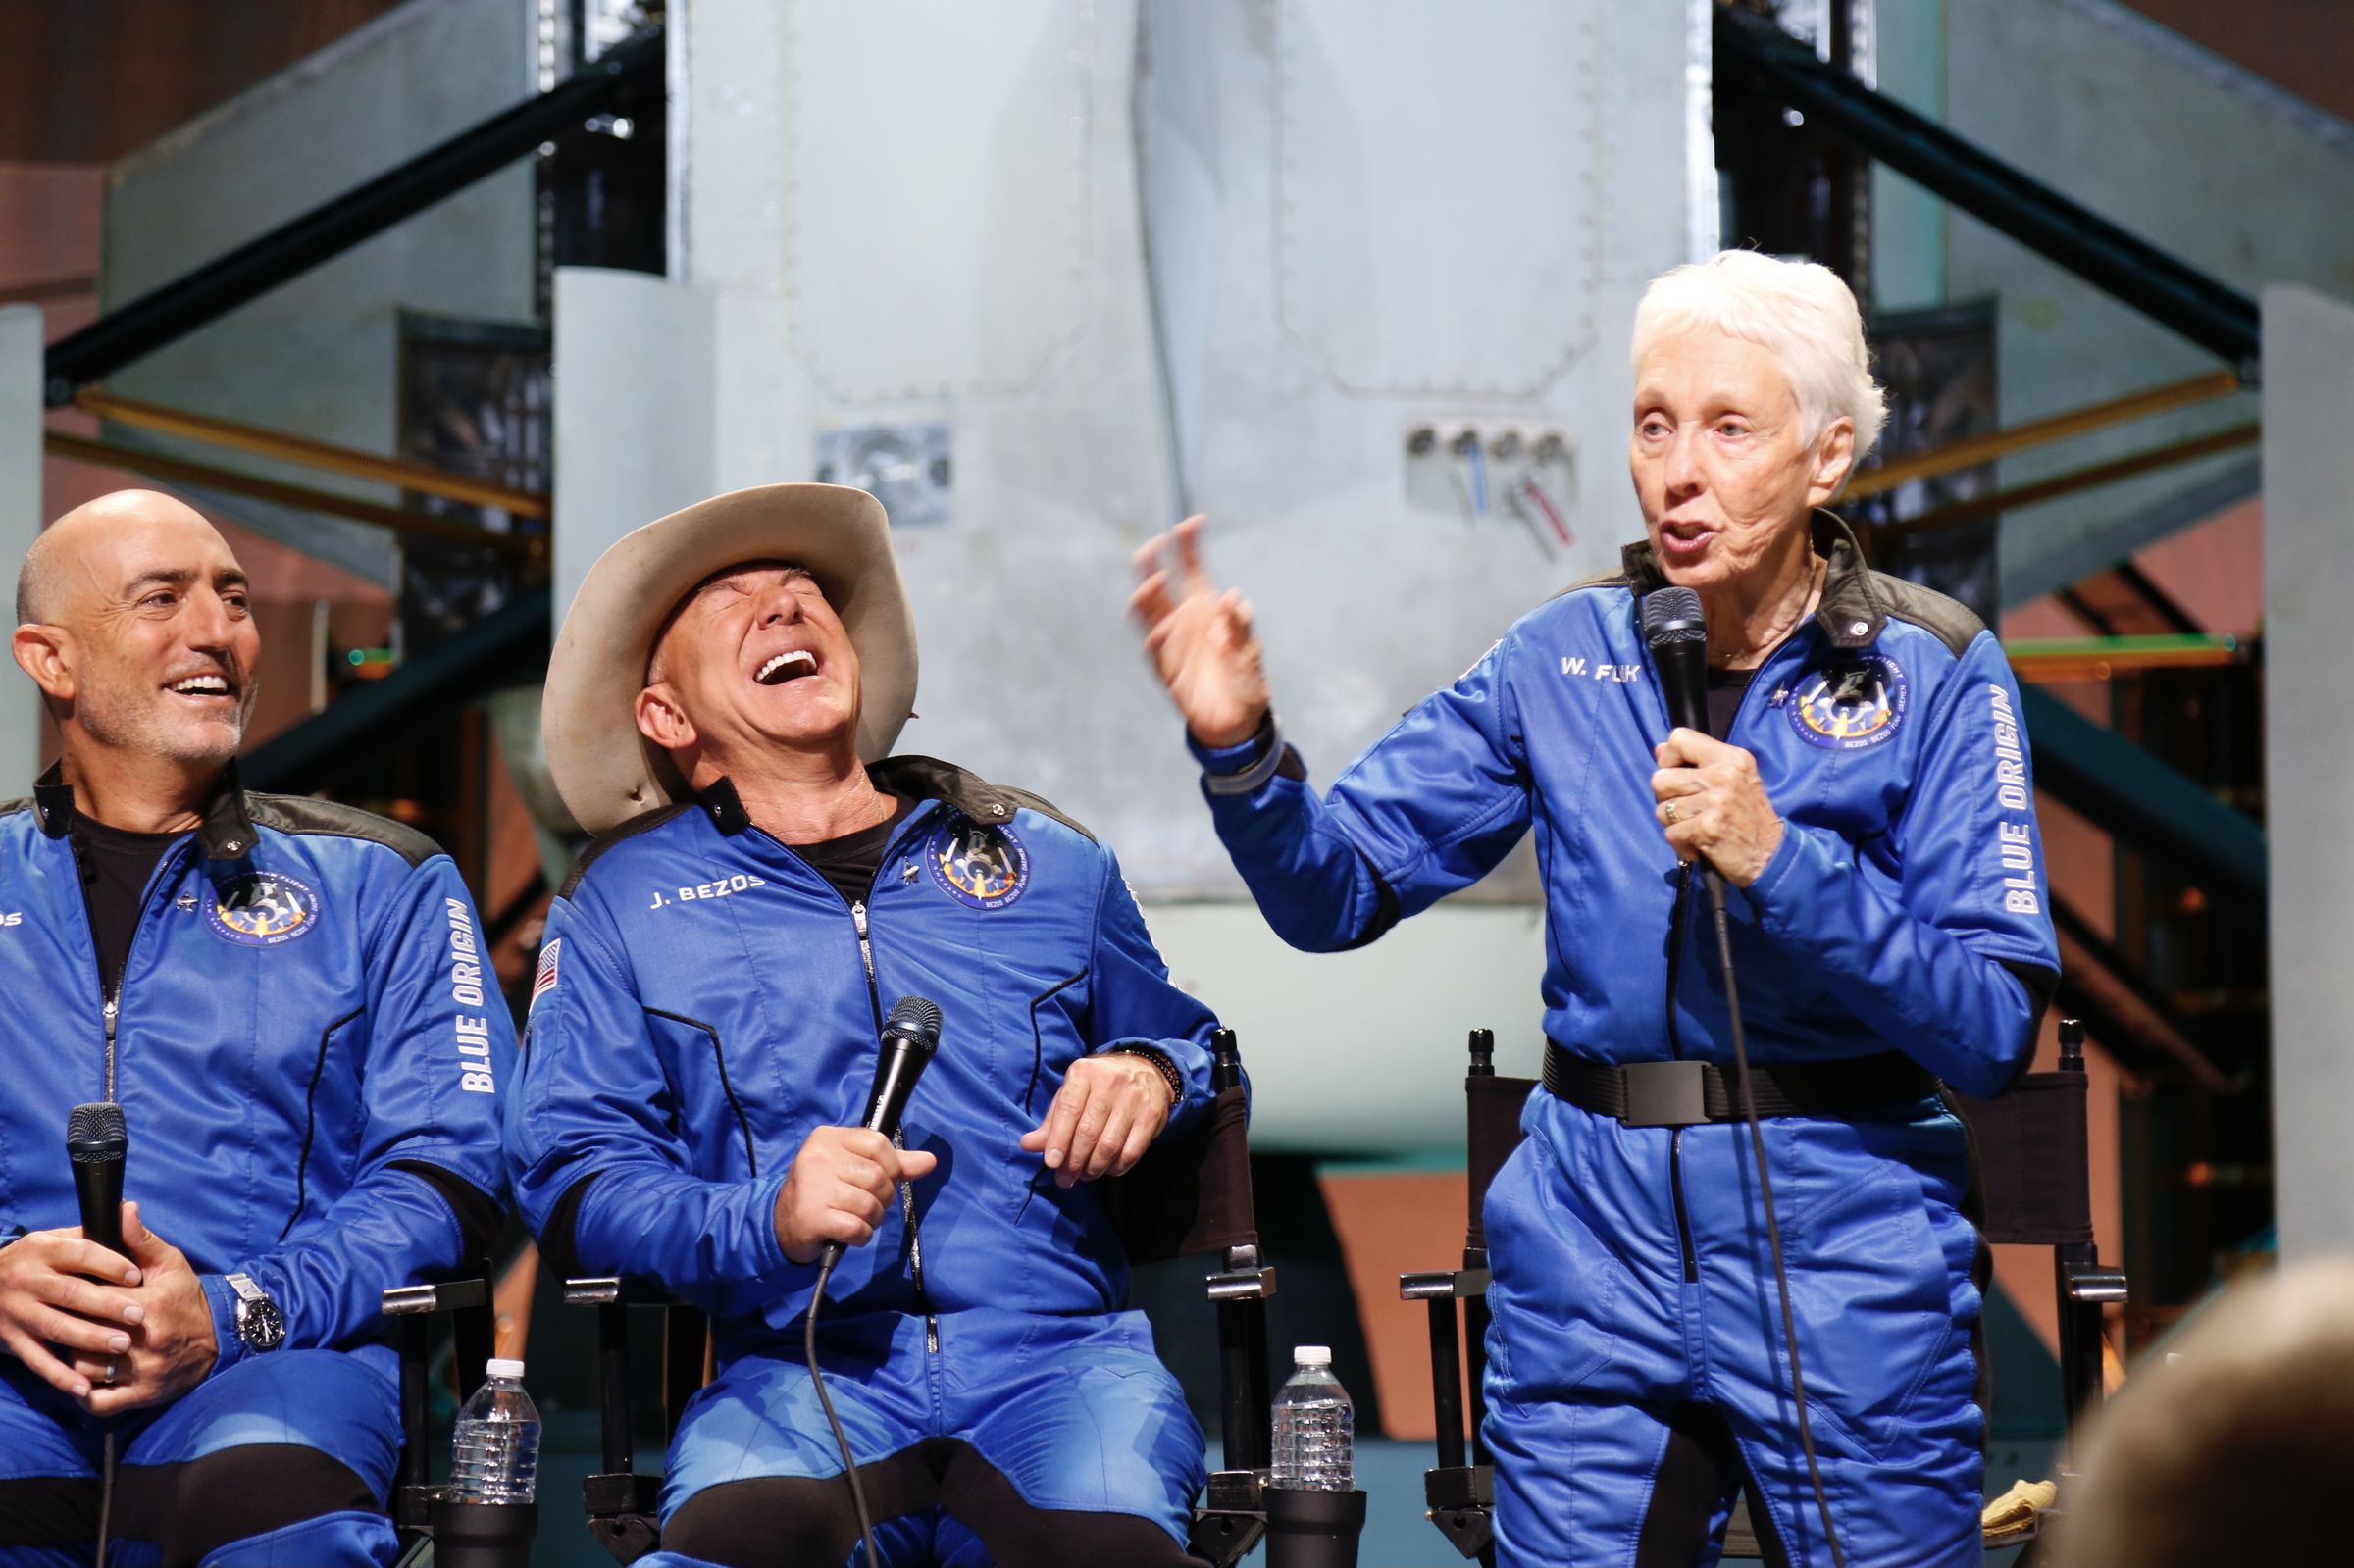 Wally Funk rhapsodizes about her flight to the edge of space aboard Blue Origin’s crew capsule  during a post-mission event with the rest of the NS-16 crew.